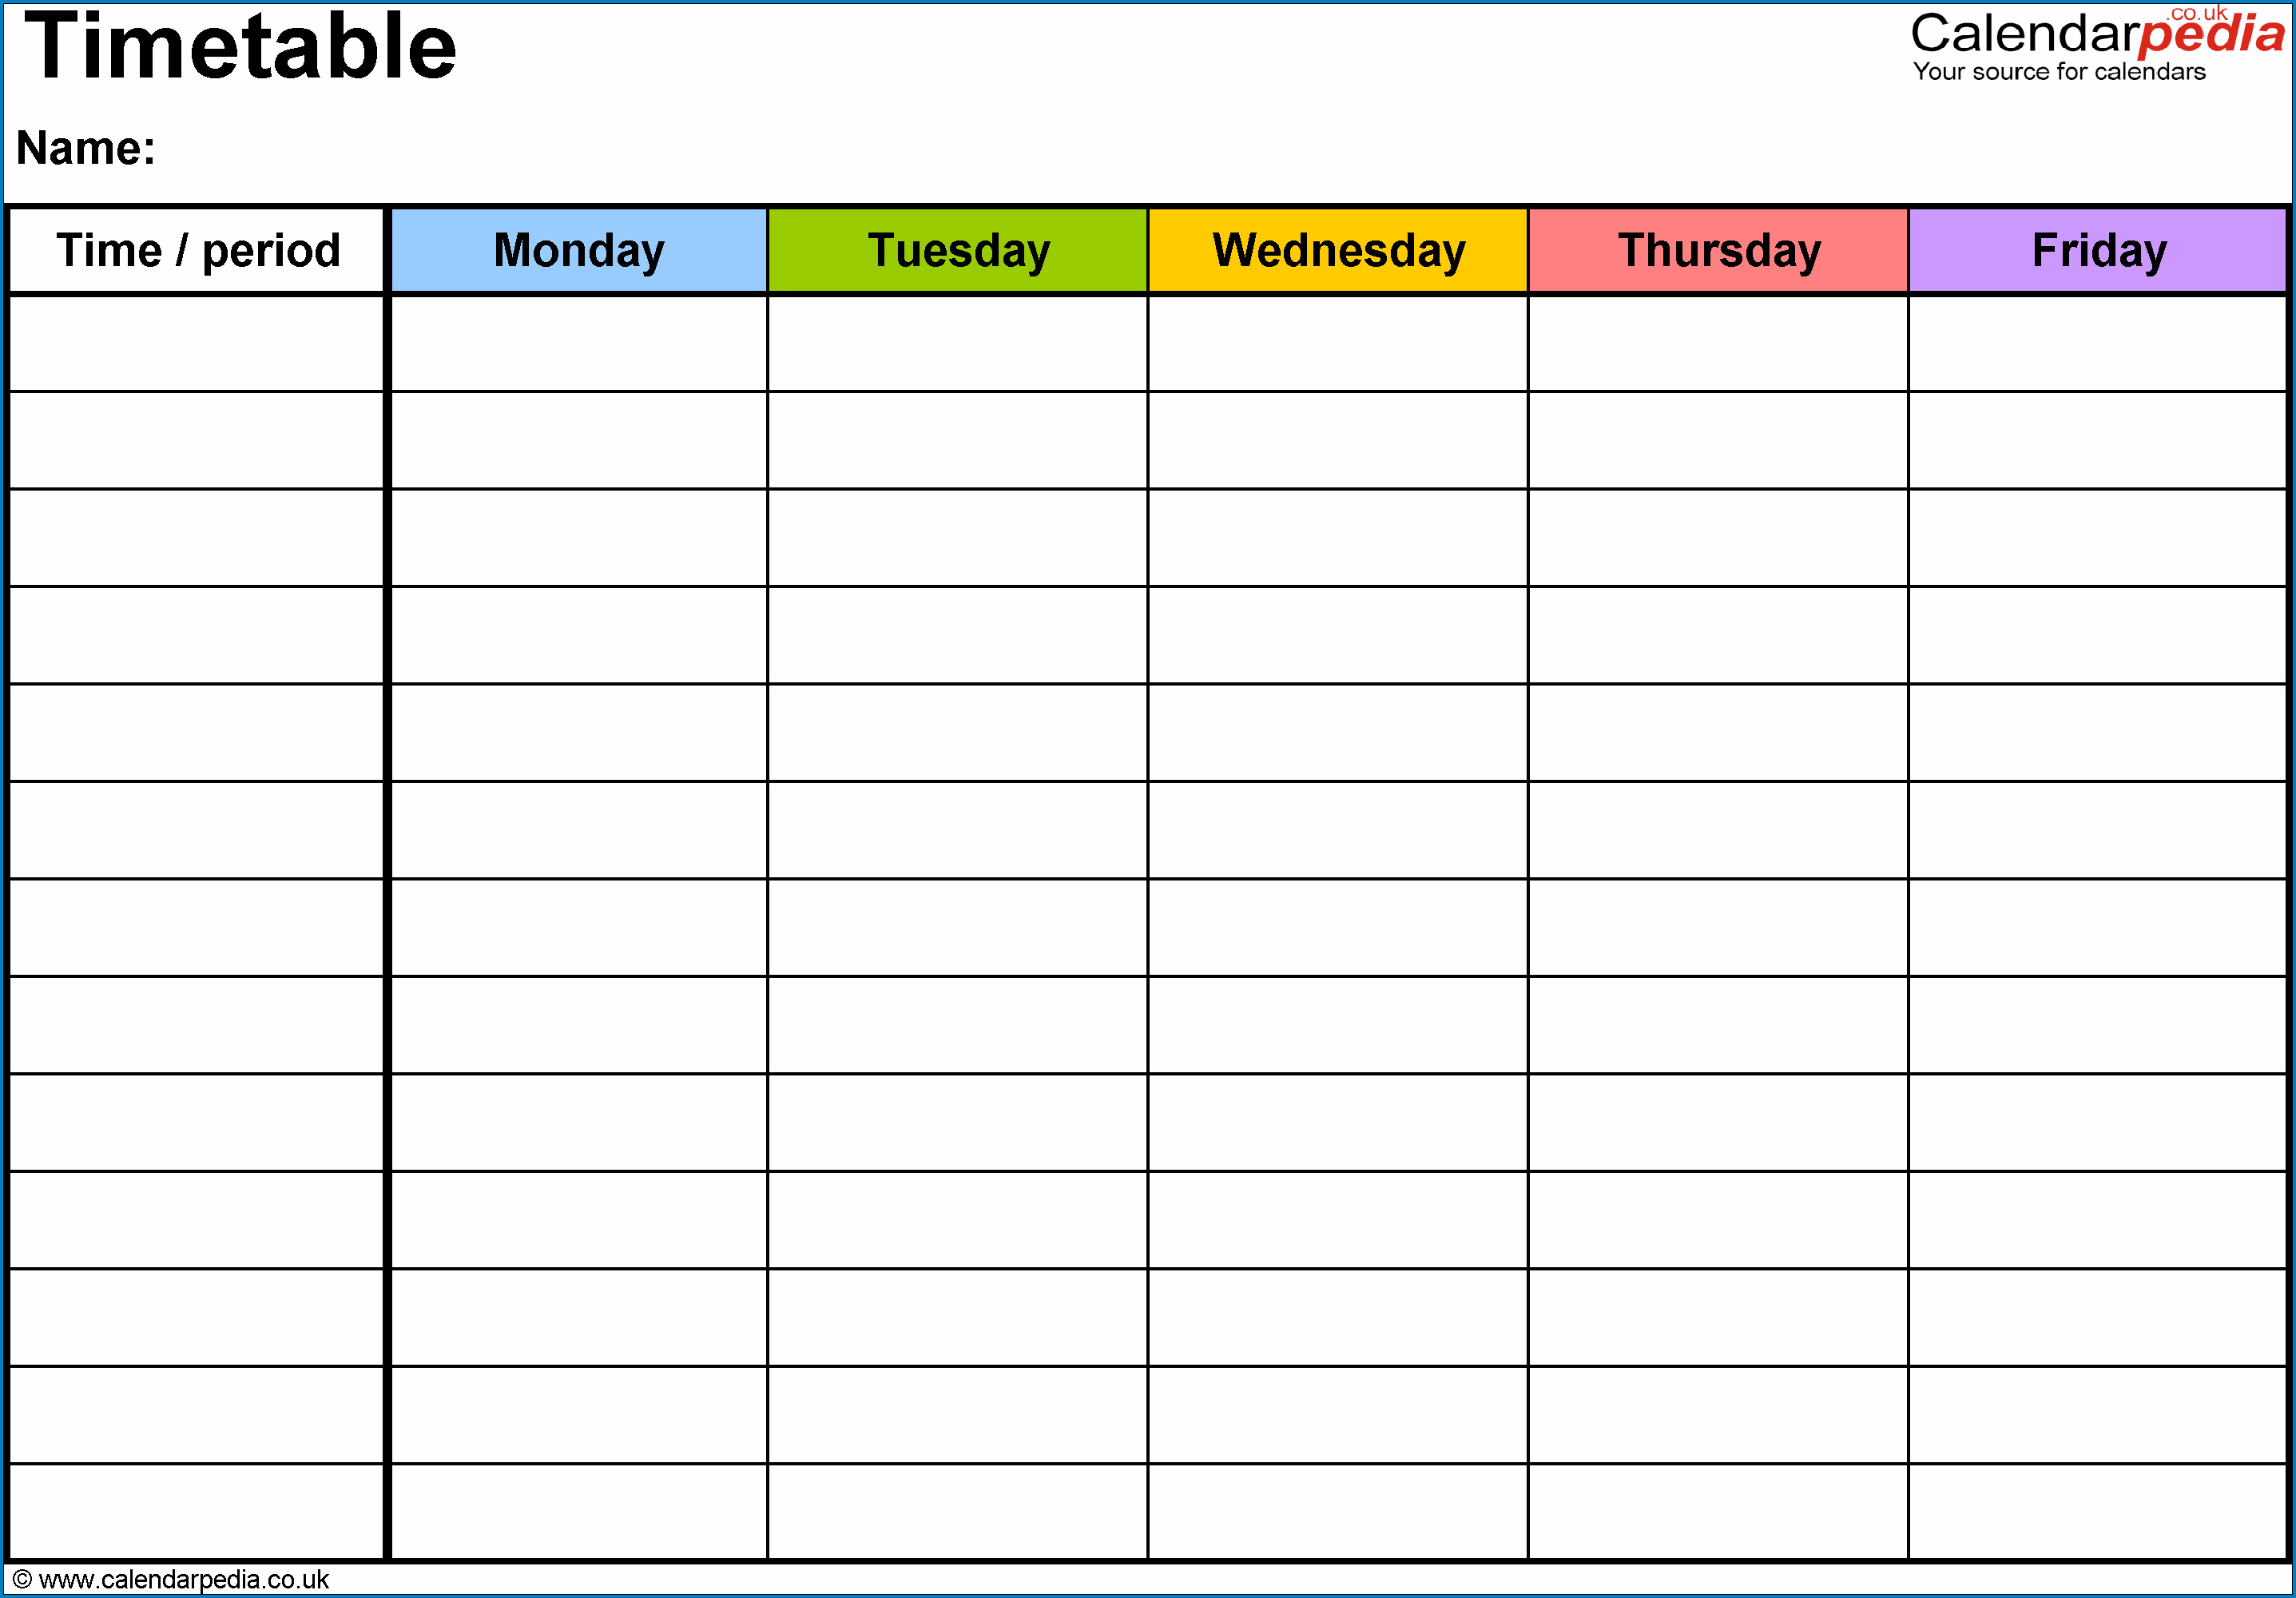 Timetable Template Sample